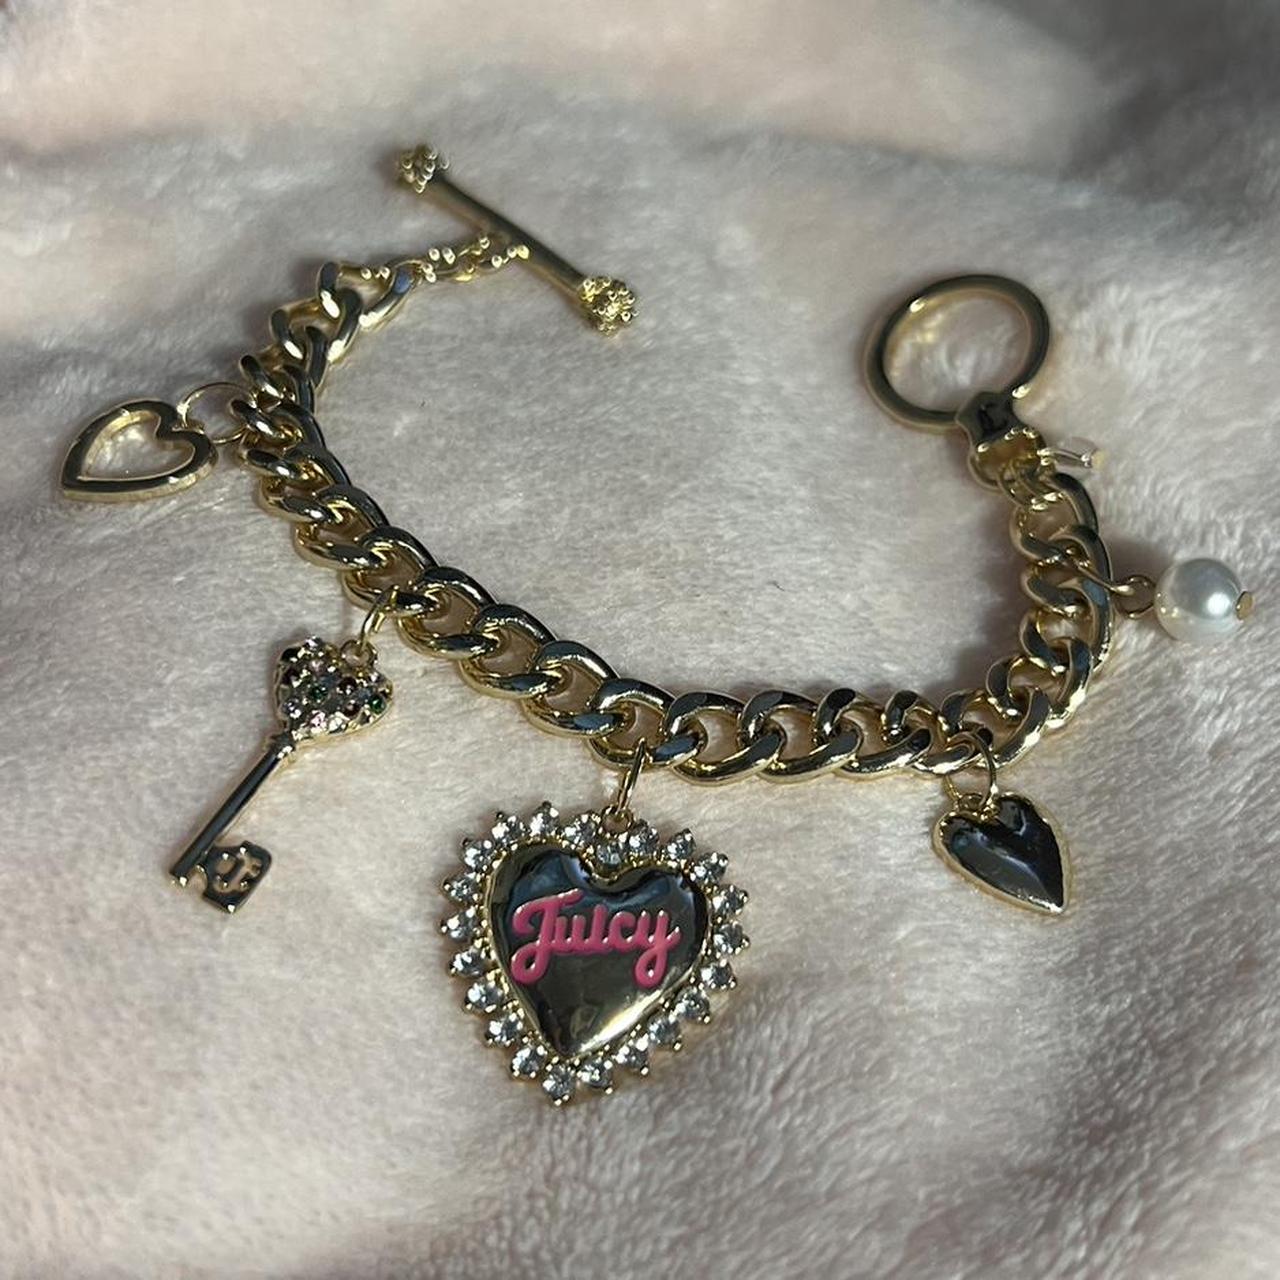 Juicy Couture Bracelet Rose Gold Tone Heart Charm Costume Fashion Jewelry